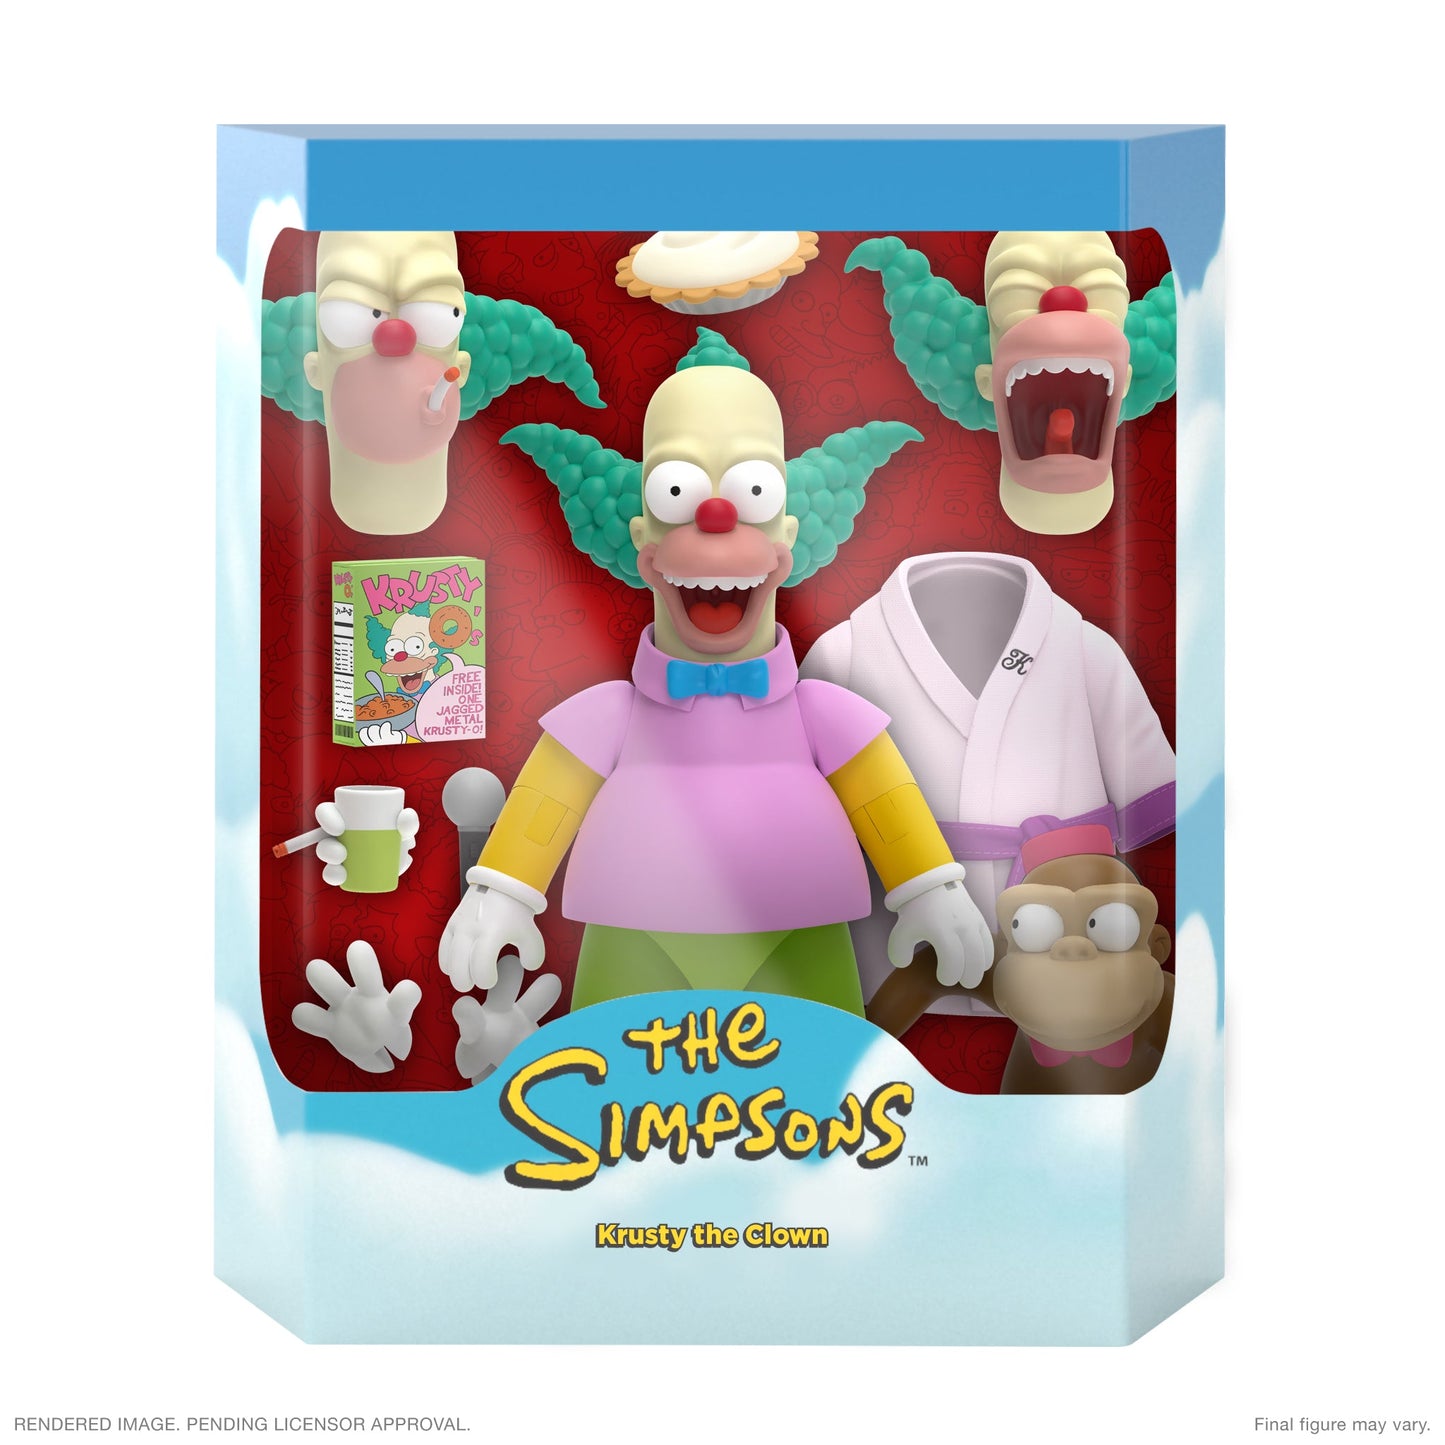 The Simpsons ULTIMATES! Wave 2 - Krusty